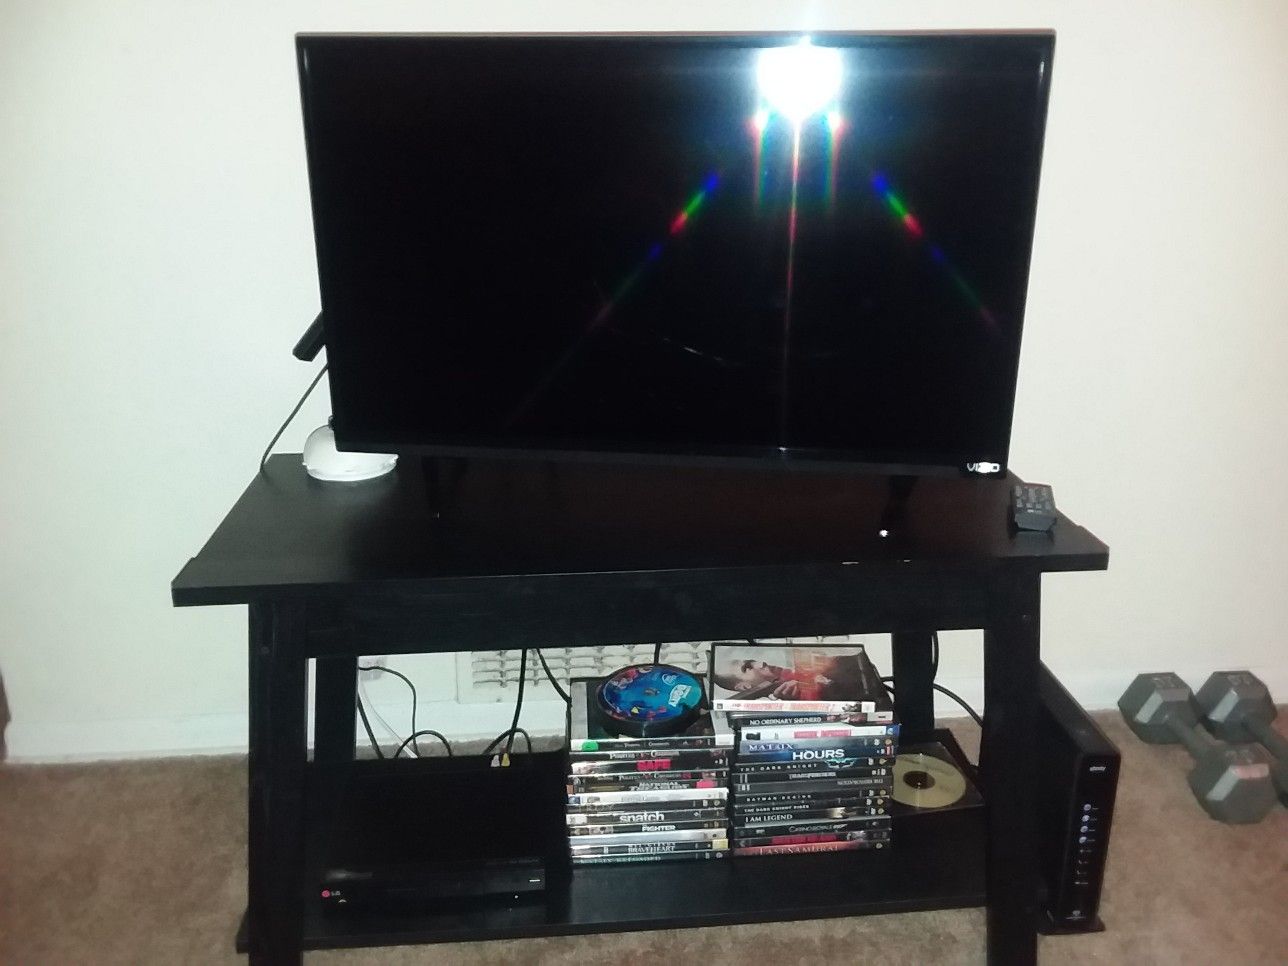 Selling 32 inch Vizo TV with remote. Xbox 360 3 games controller. 20 or so movies